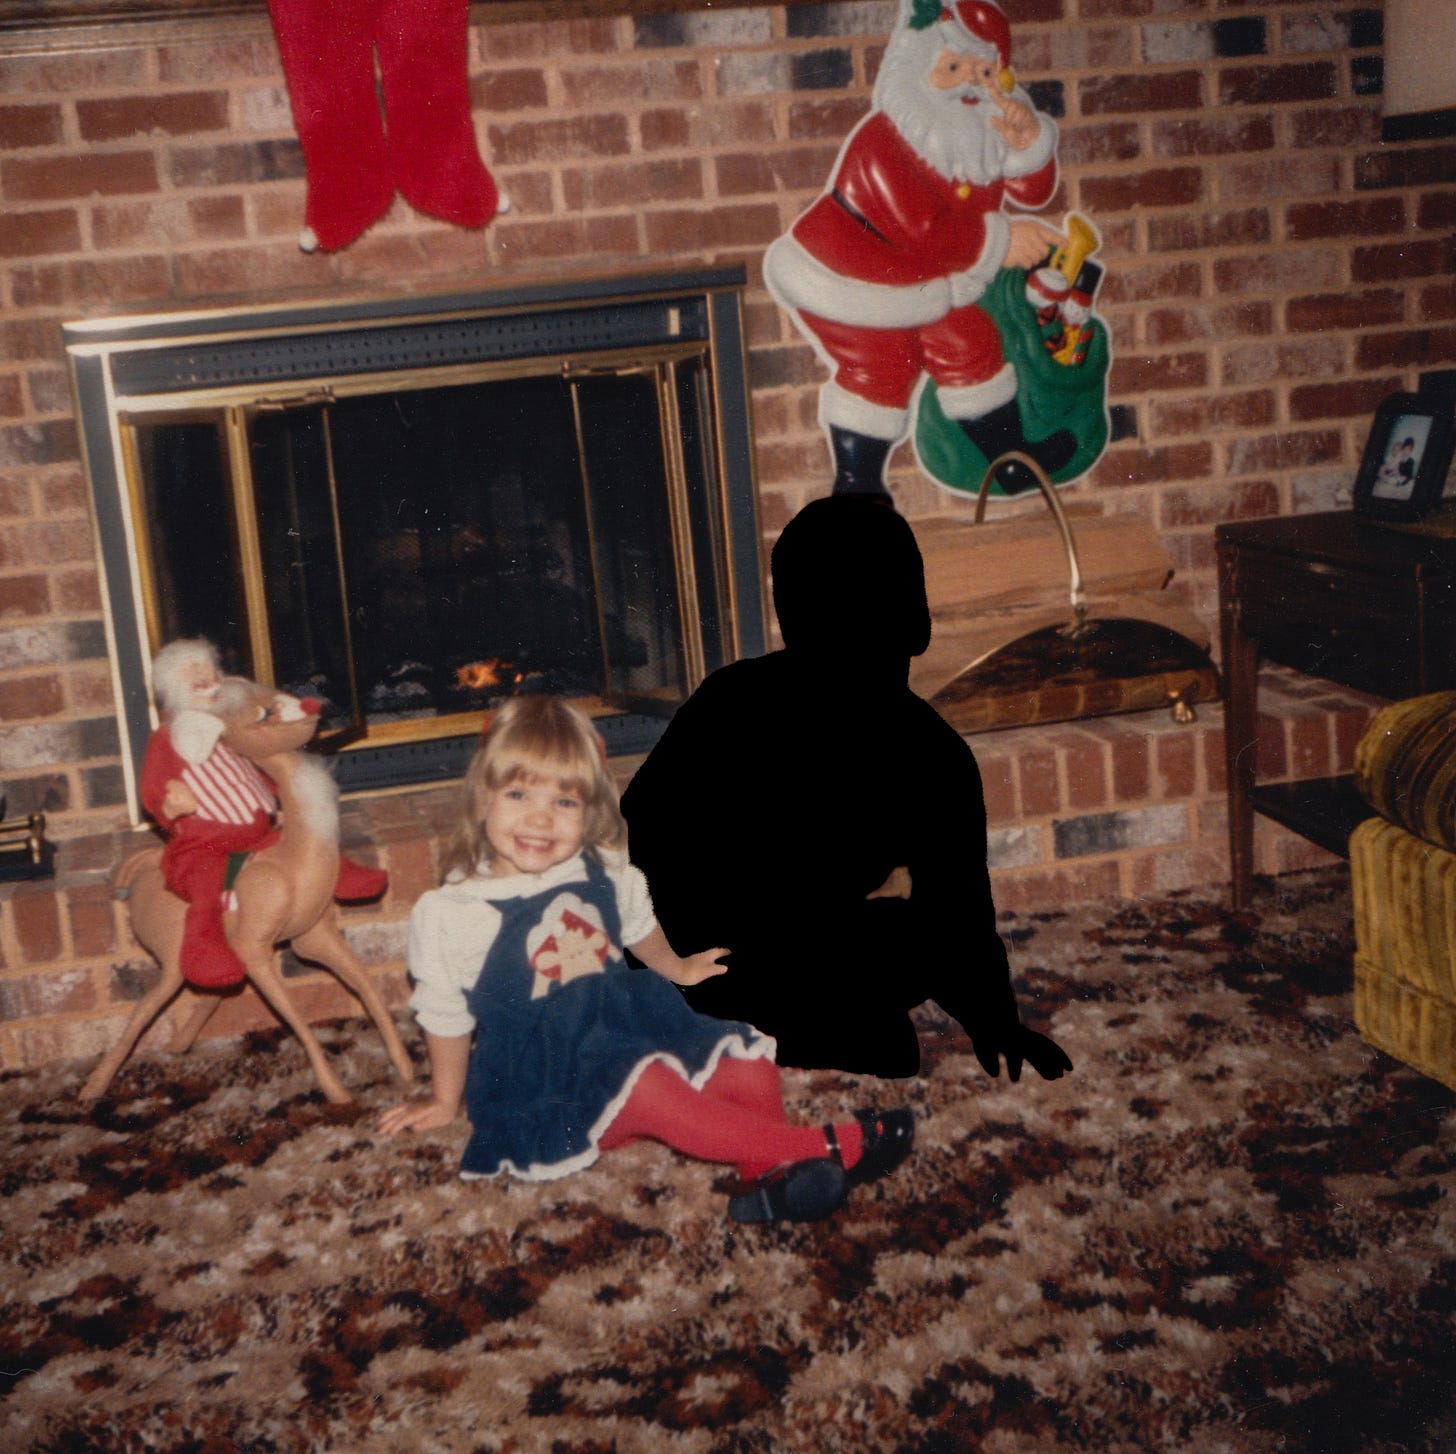 My brother and I in front of the fireplace during the holidays. I'm a toddler and he is silhouetted in black.